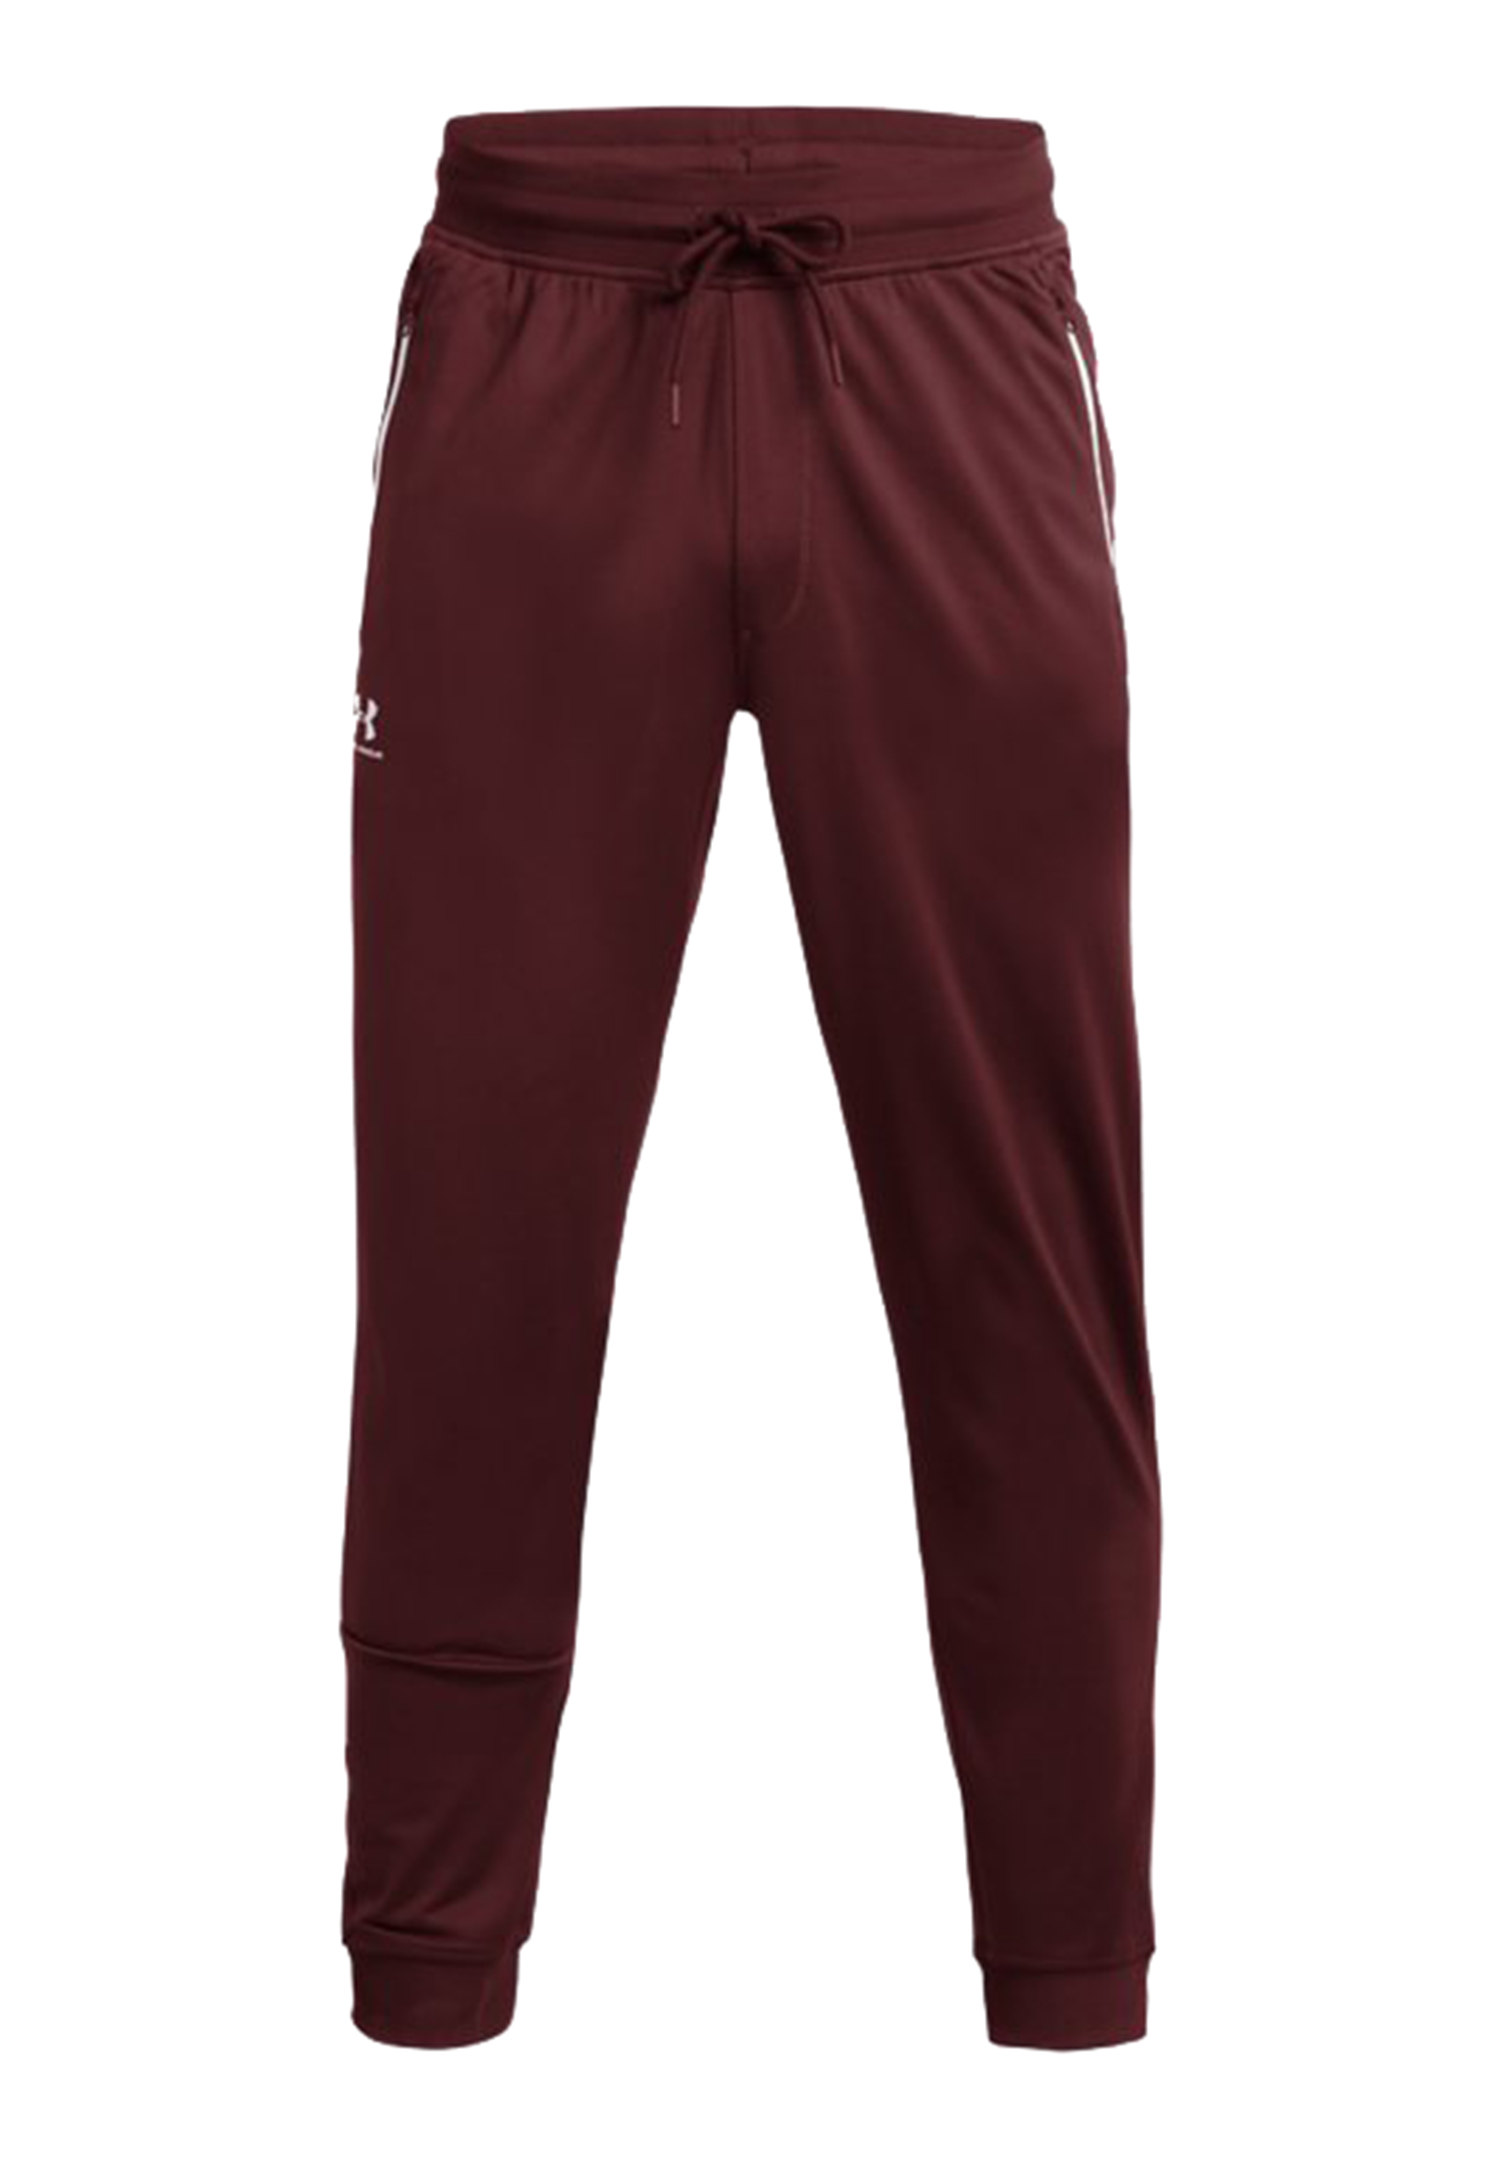 Under Armour Sportstyle Tricot Jogger Herren Fitness Hose Sporthose rot von Under Armour